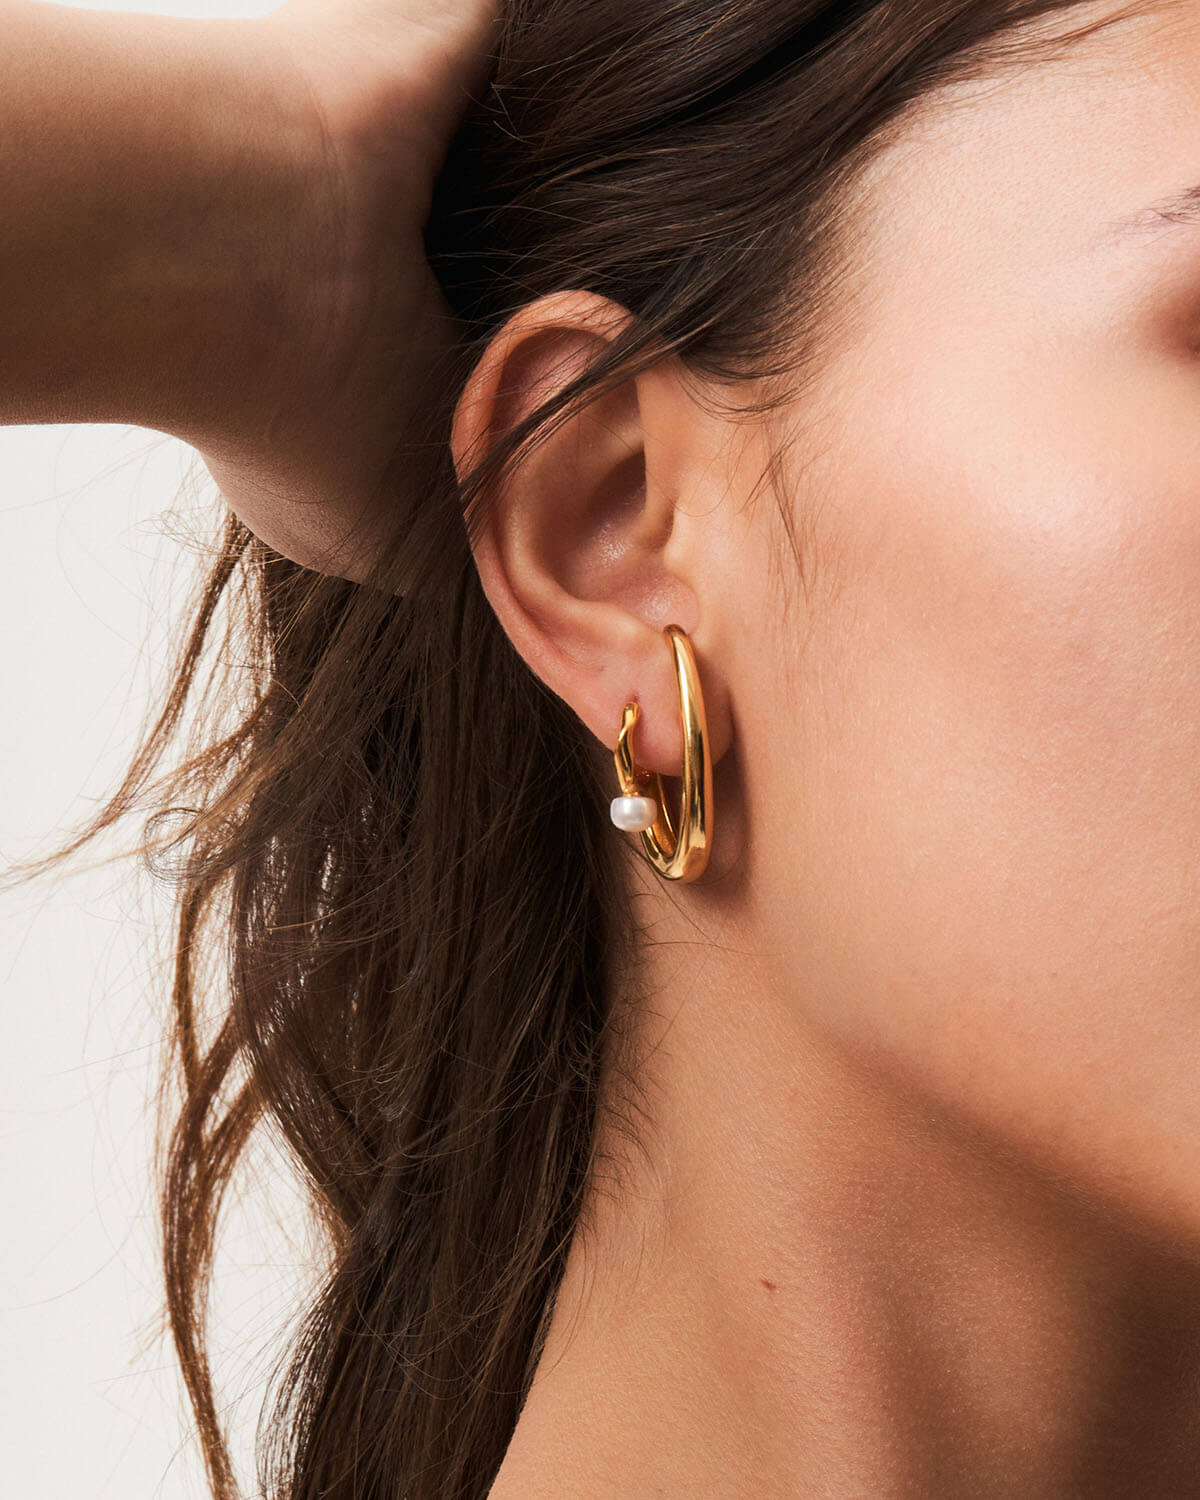 Make a Statement with Bold Hoops Earrings Designs